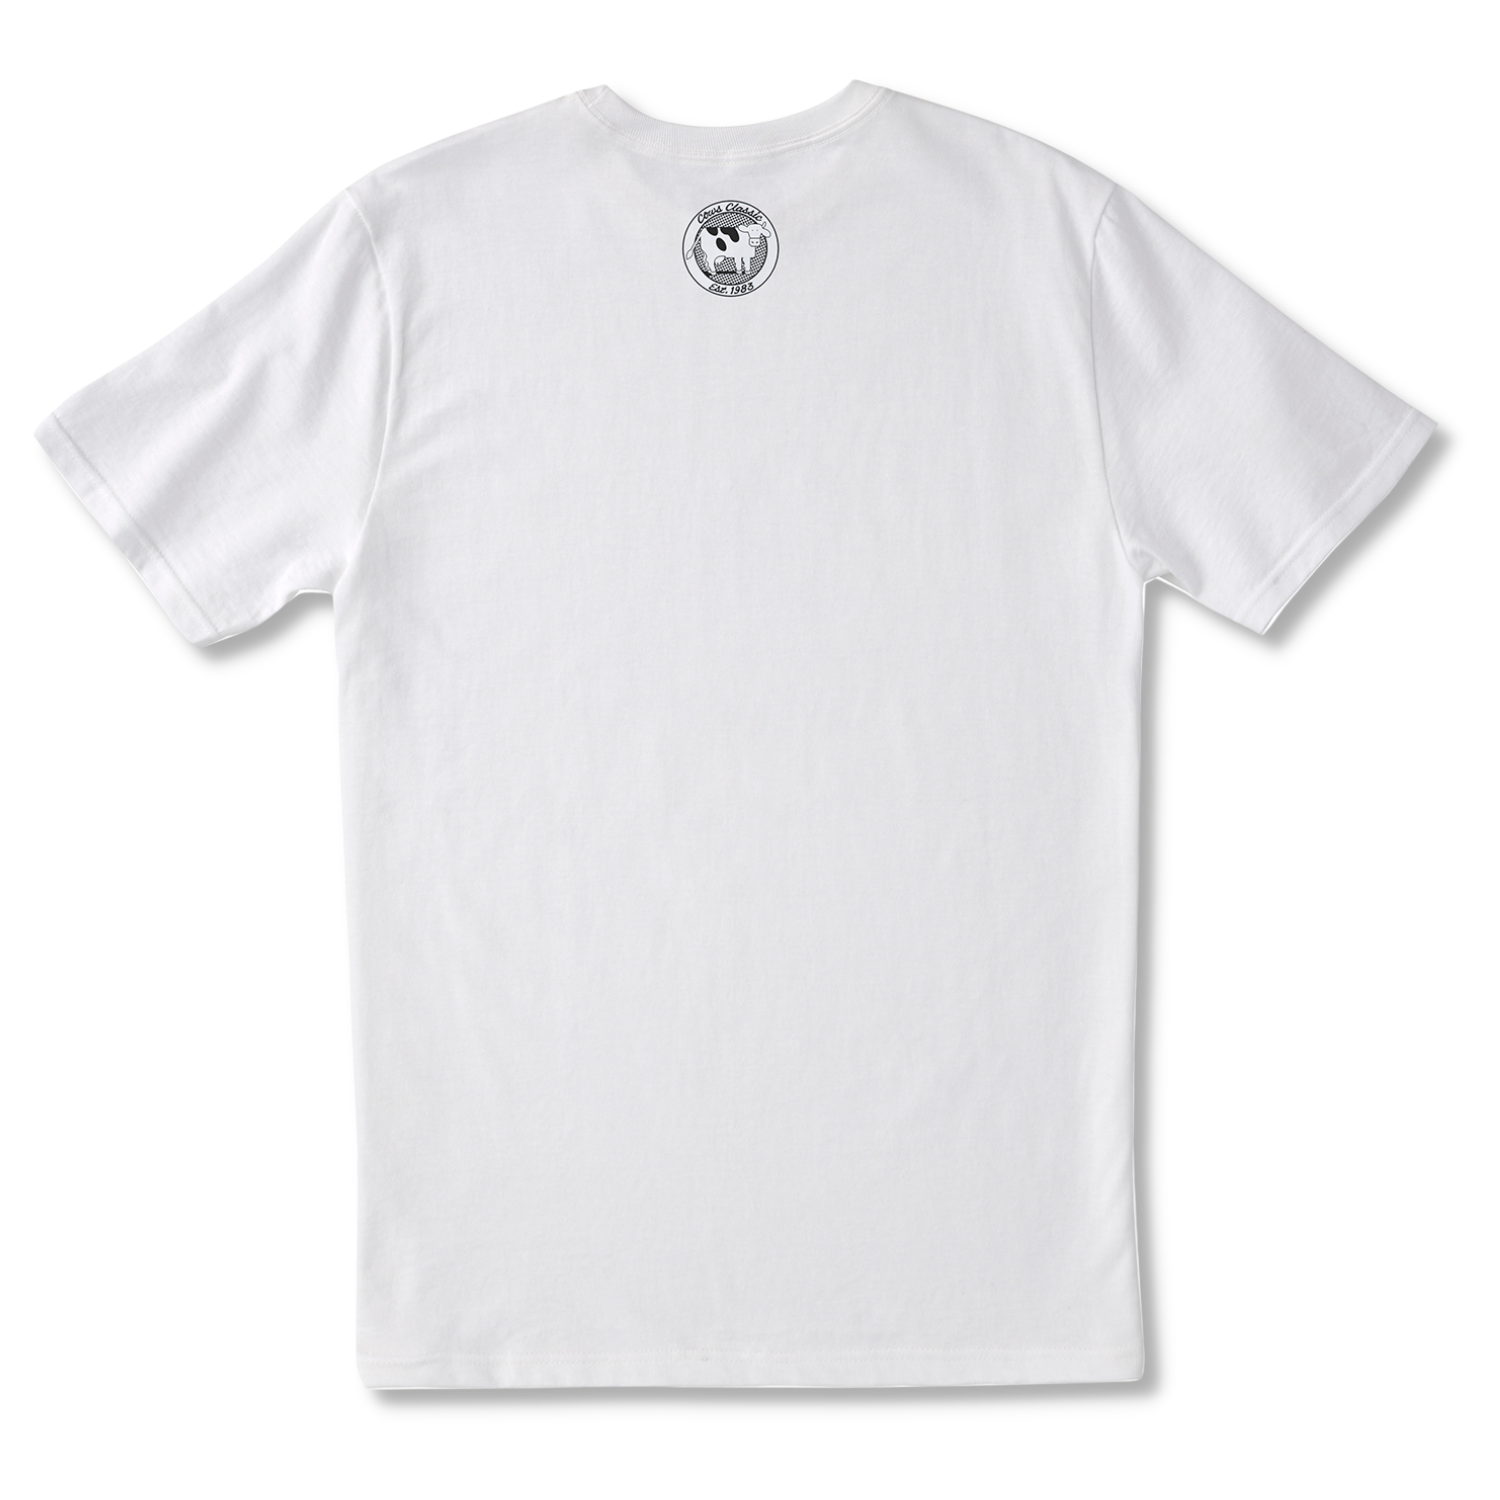 Iron Cow COWS Classic T